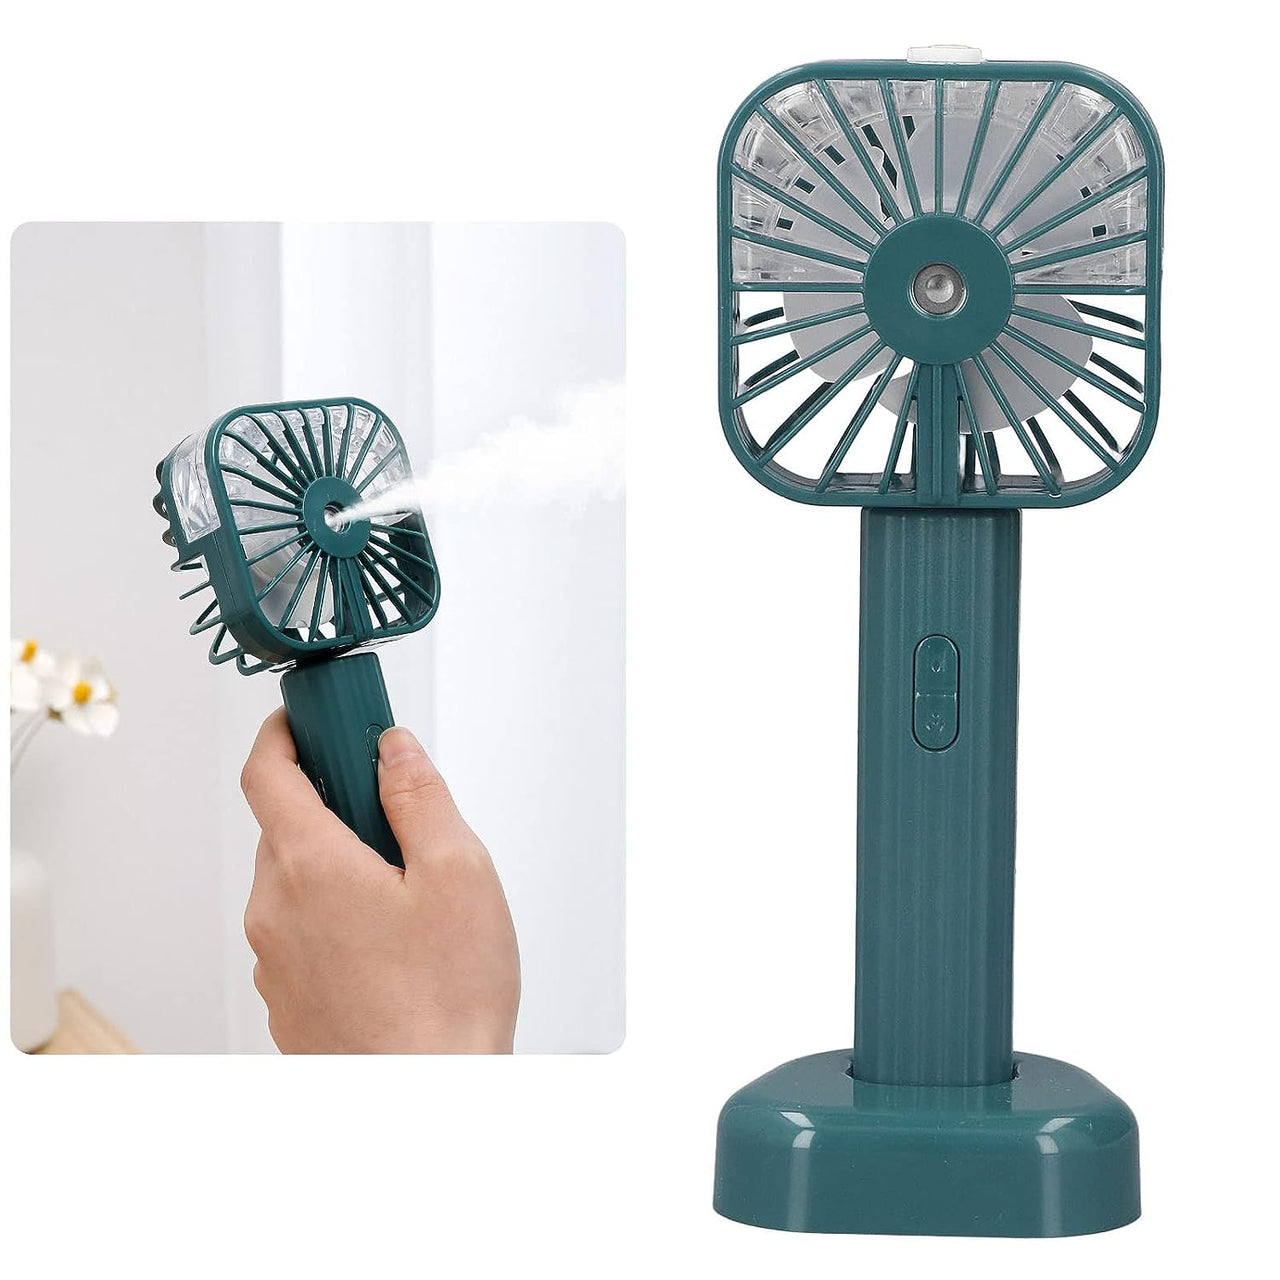 3 In 1 Mini Spray Fan With USB Cable